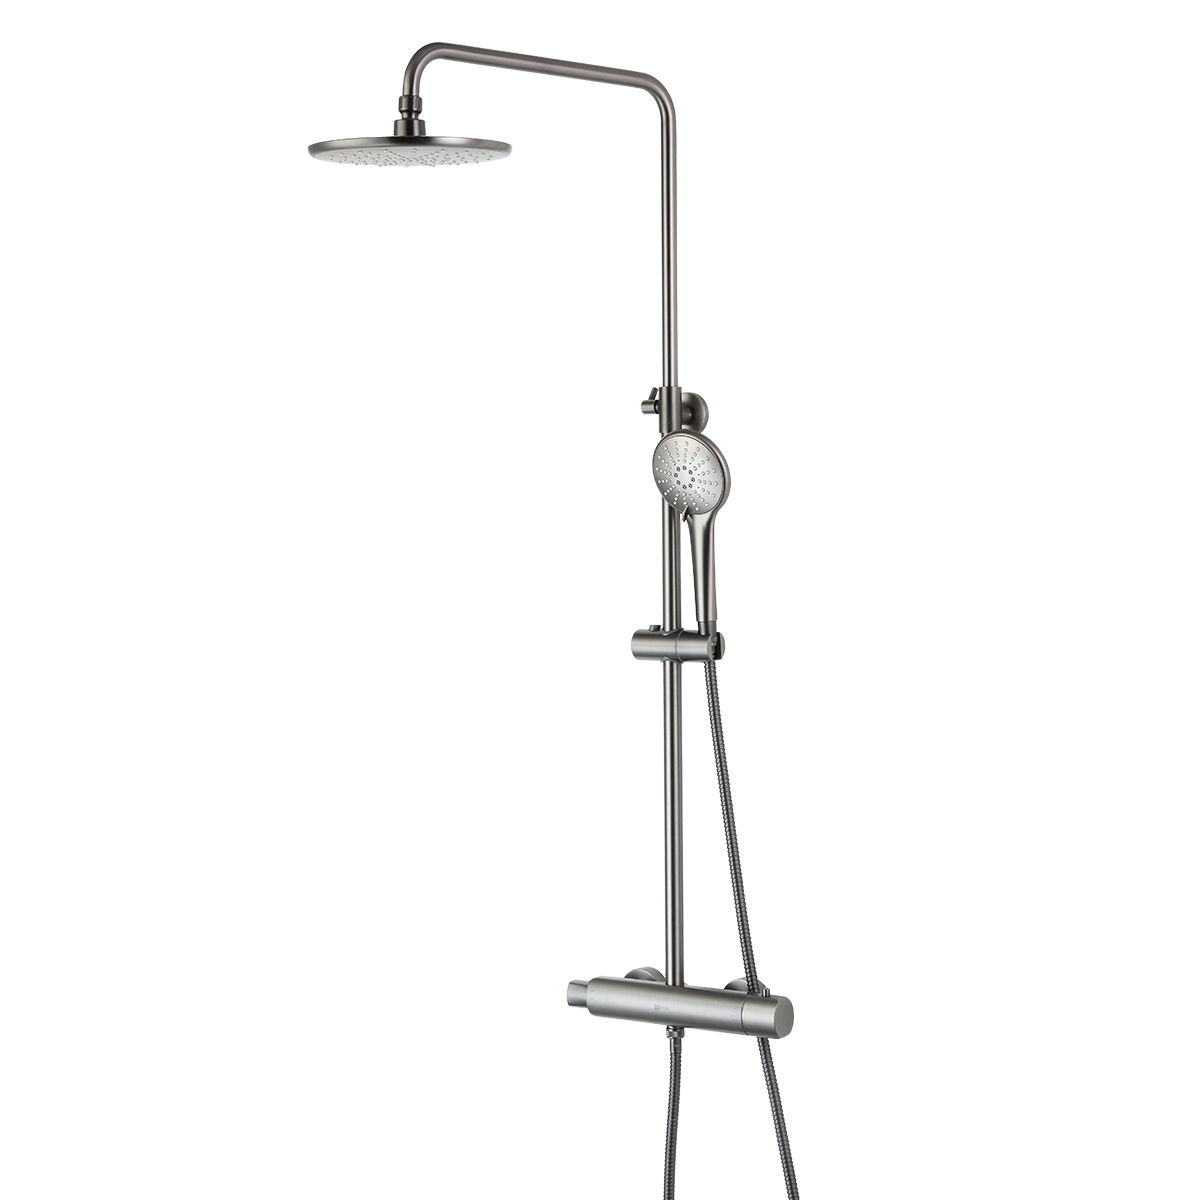 LM3770GM Thermostatic shower faucet with adjustable rod height and «Tropical rain» shower head